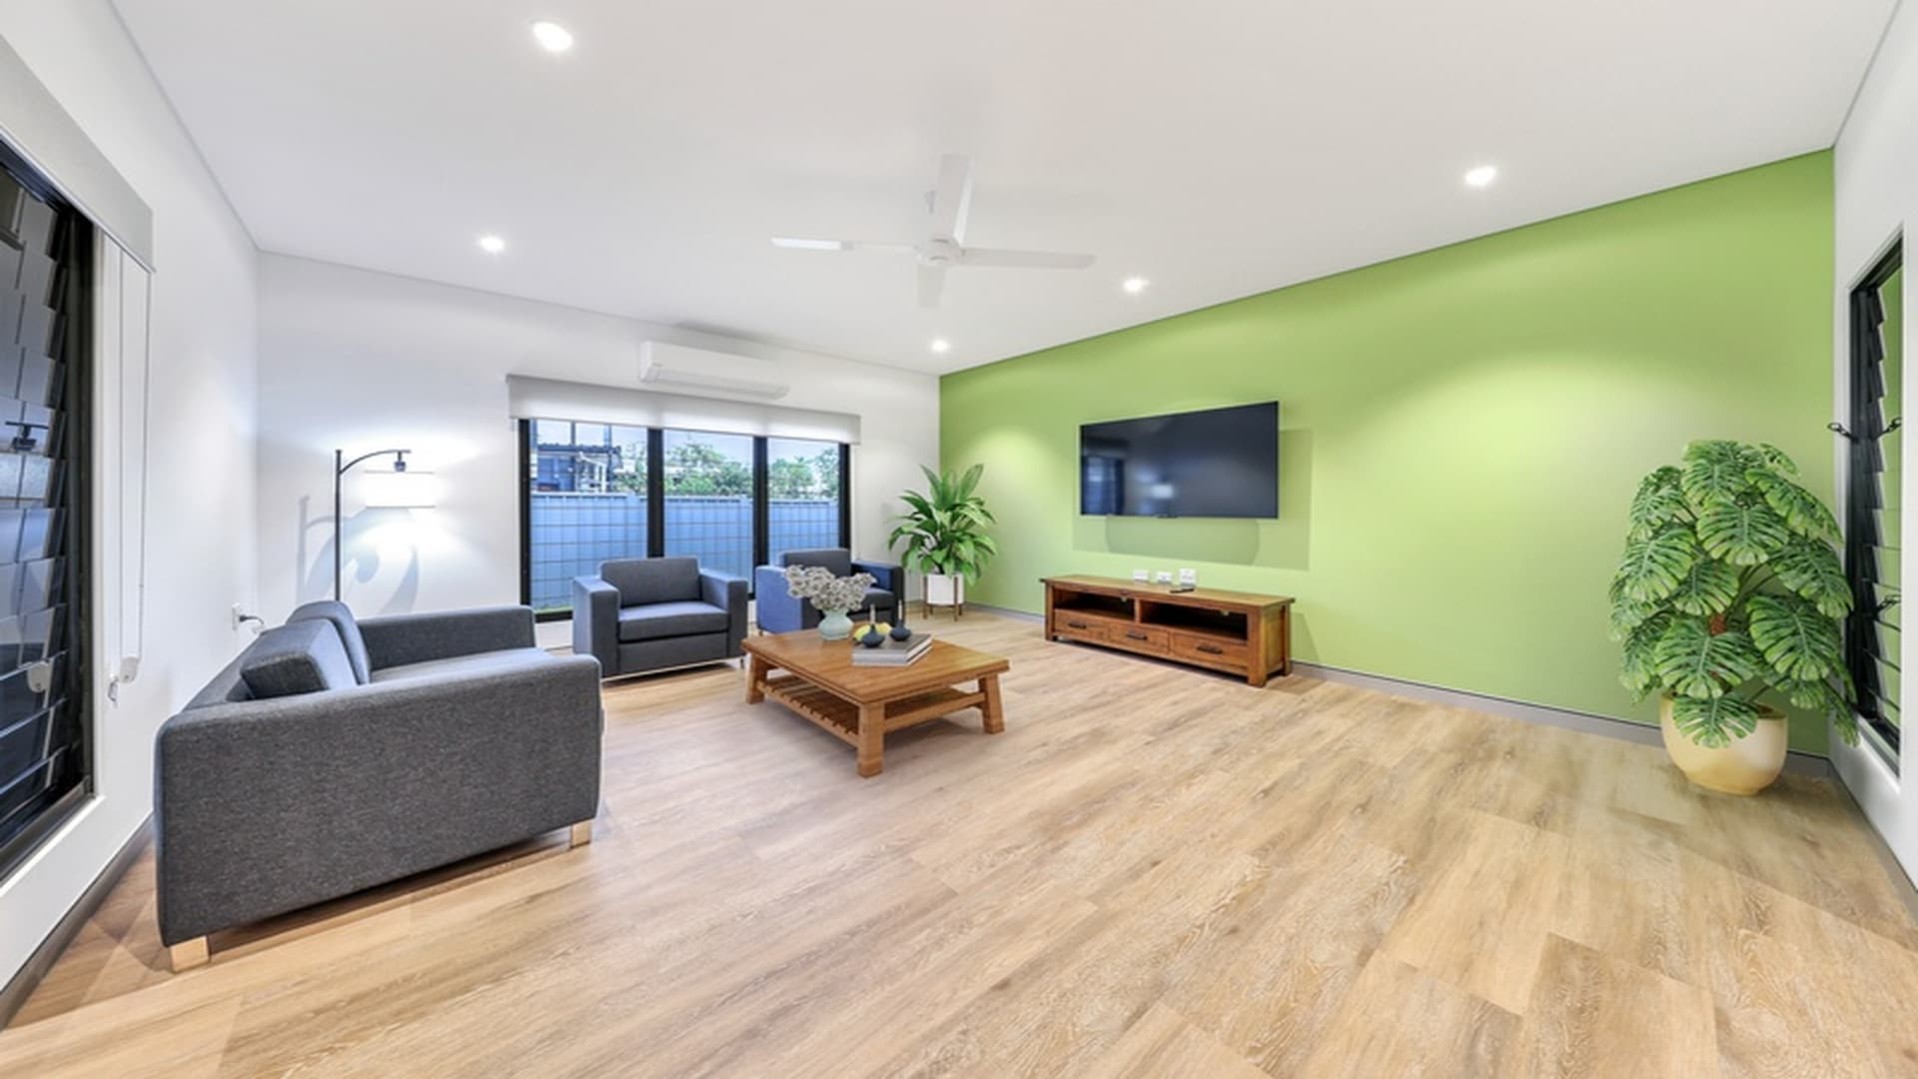 Spacious living room, open plan, hard flooring, green feature wall and large windows.